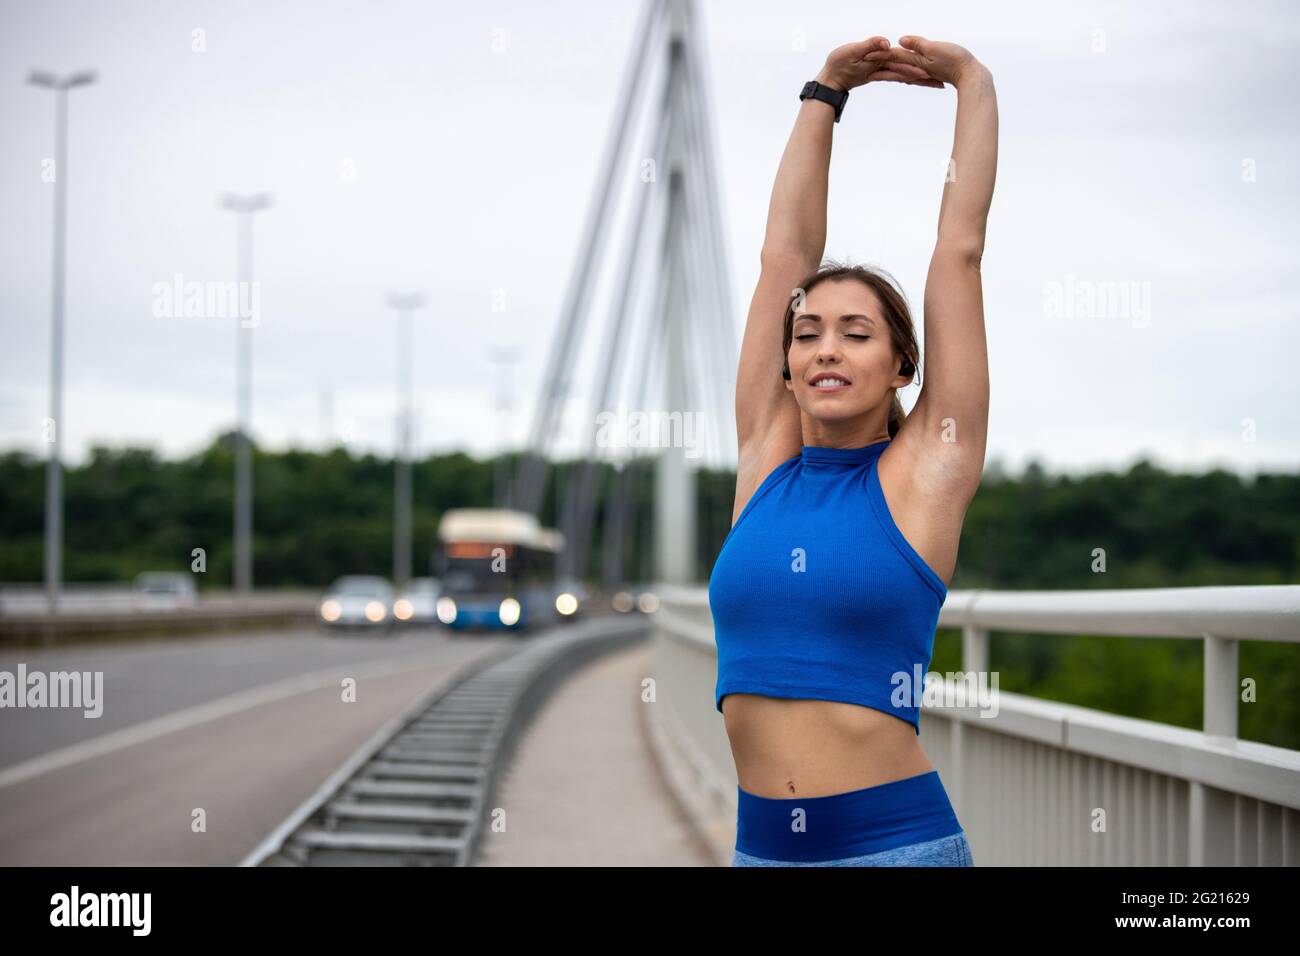 Young woman standing on bridge stretching arms overhead. Flexible